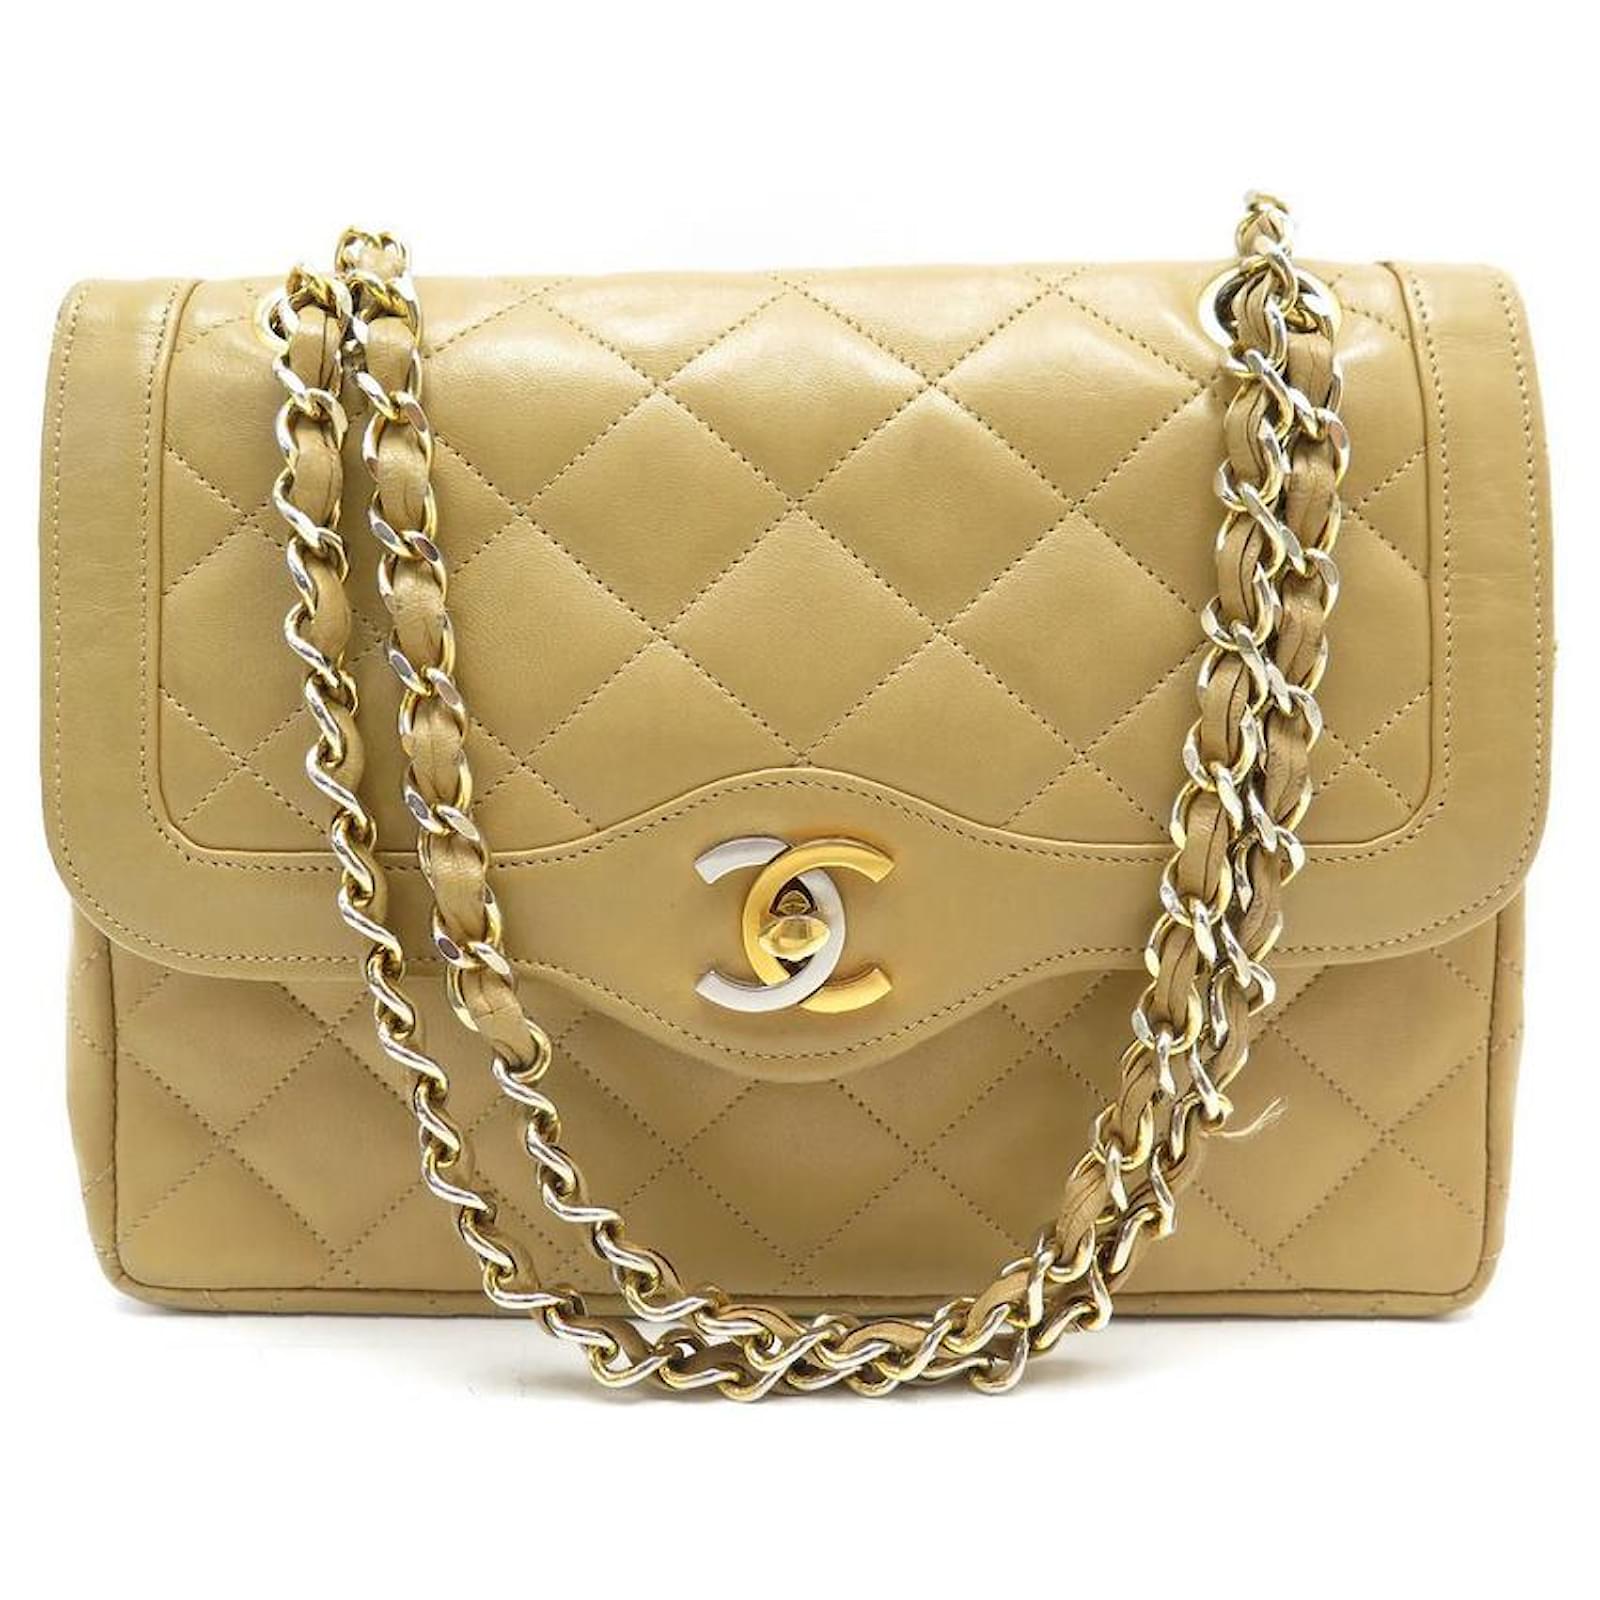 VINTAGE CHANEL TIMELESS CLASSIC HANDBAG BEIGE QUILTED LEATHER HAND